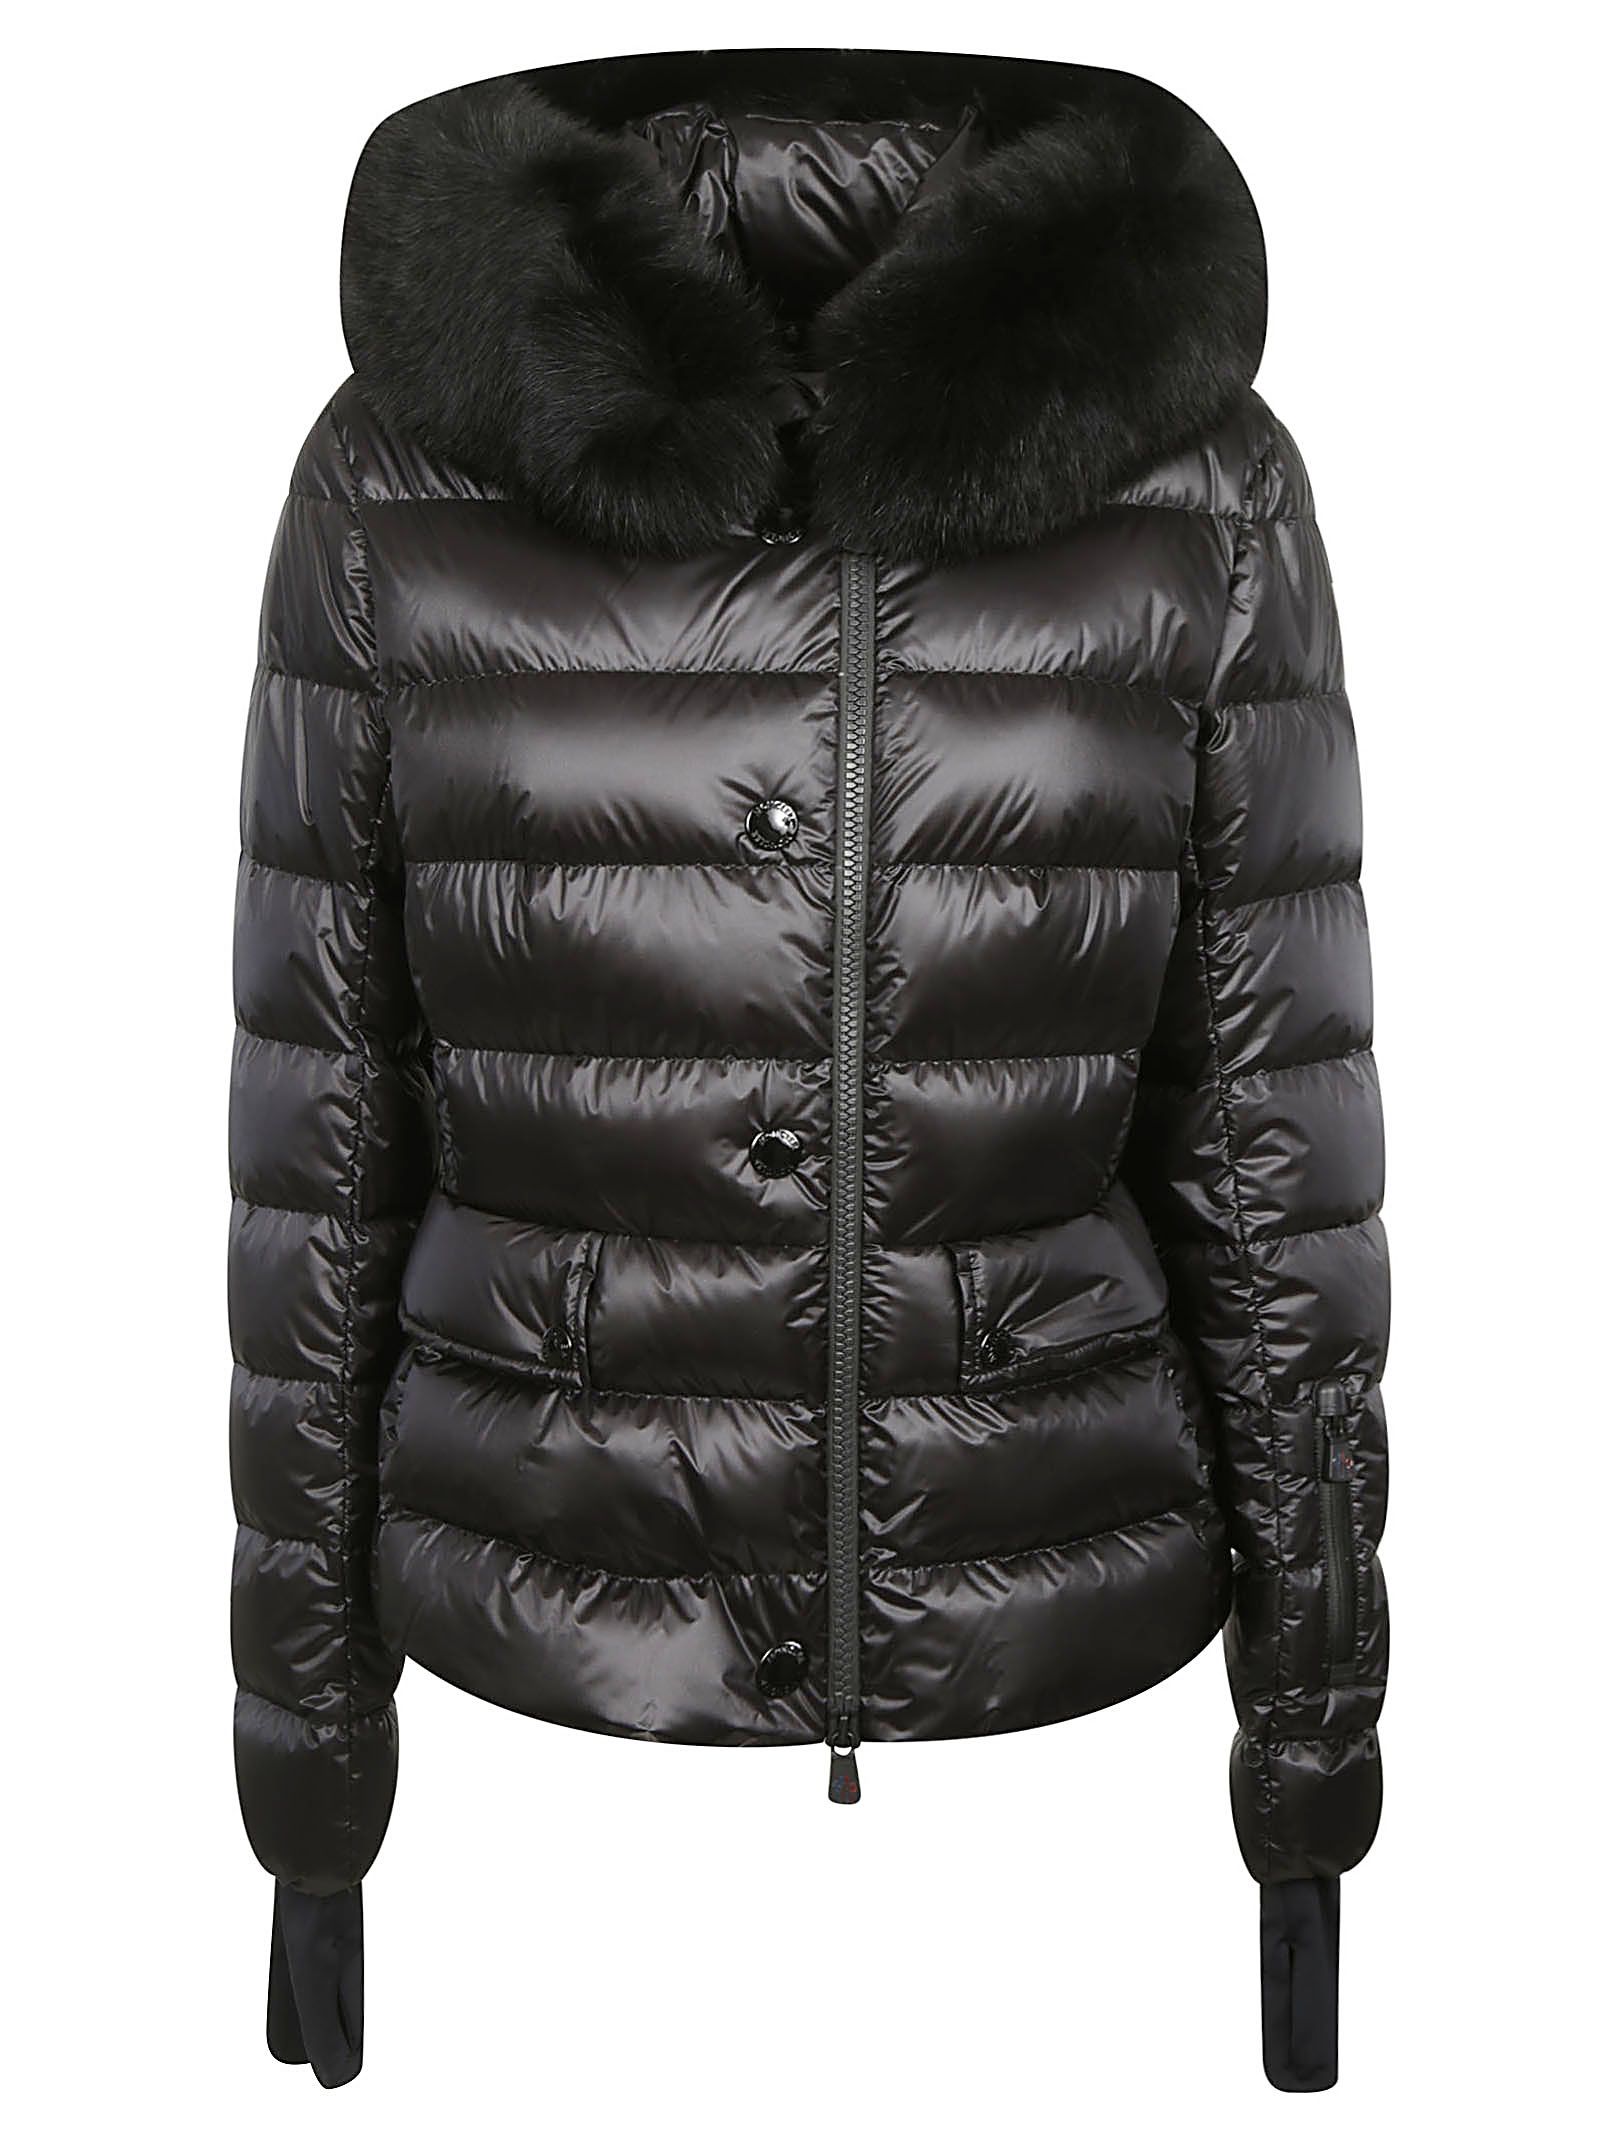 Moncler Grenoble Down Jackets | italist 